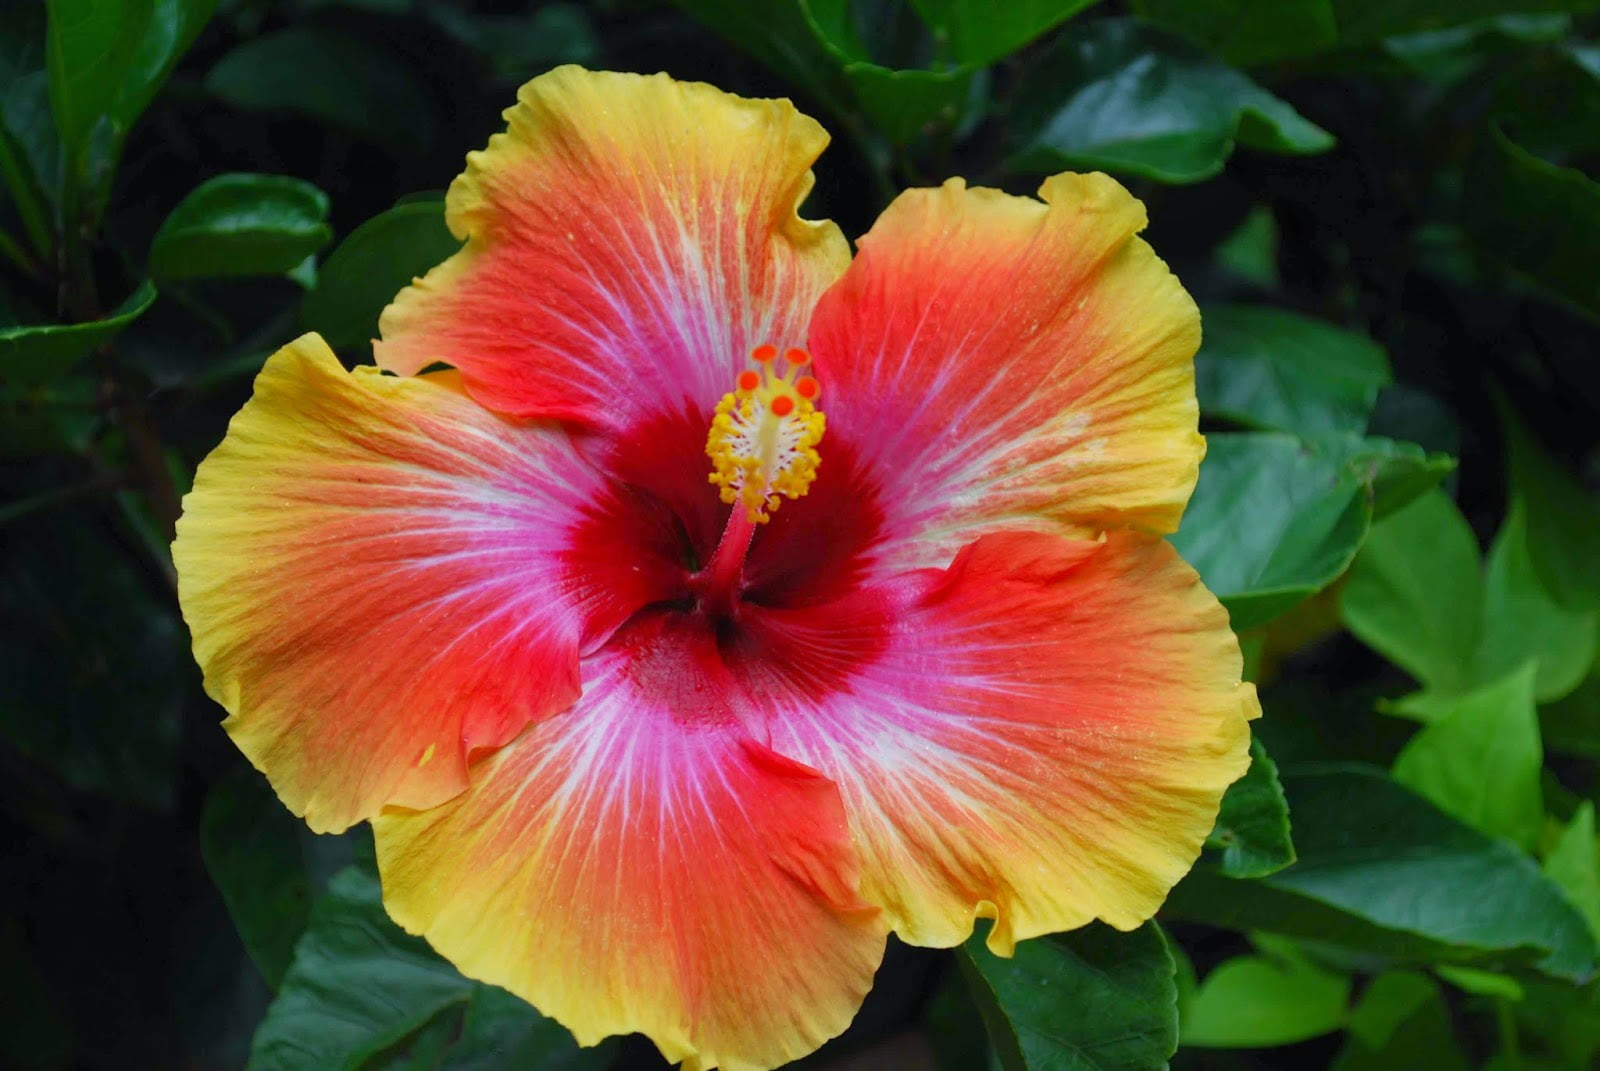 Hibiscus Fiesta Tree   Live Plant in a 21 Gallon Pot   Standard   Hibiscus  Rosa Sinensis 'Fiesta'   Beautiful and Stunning Flowering Tree from Florida  ...